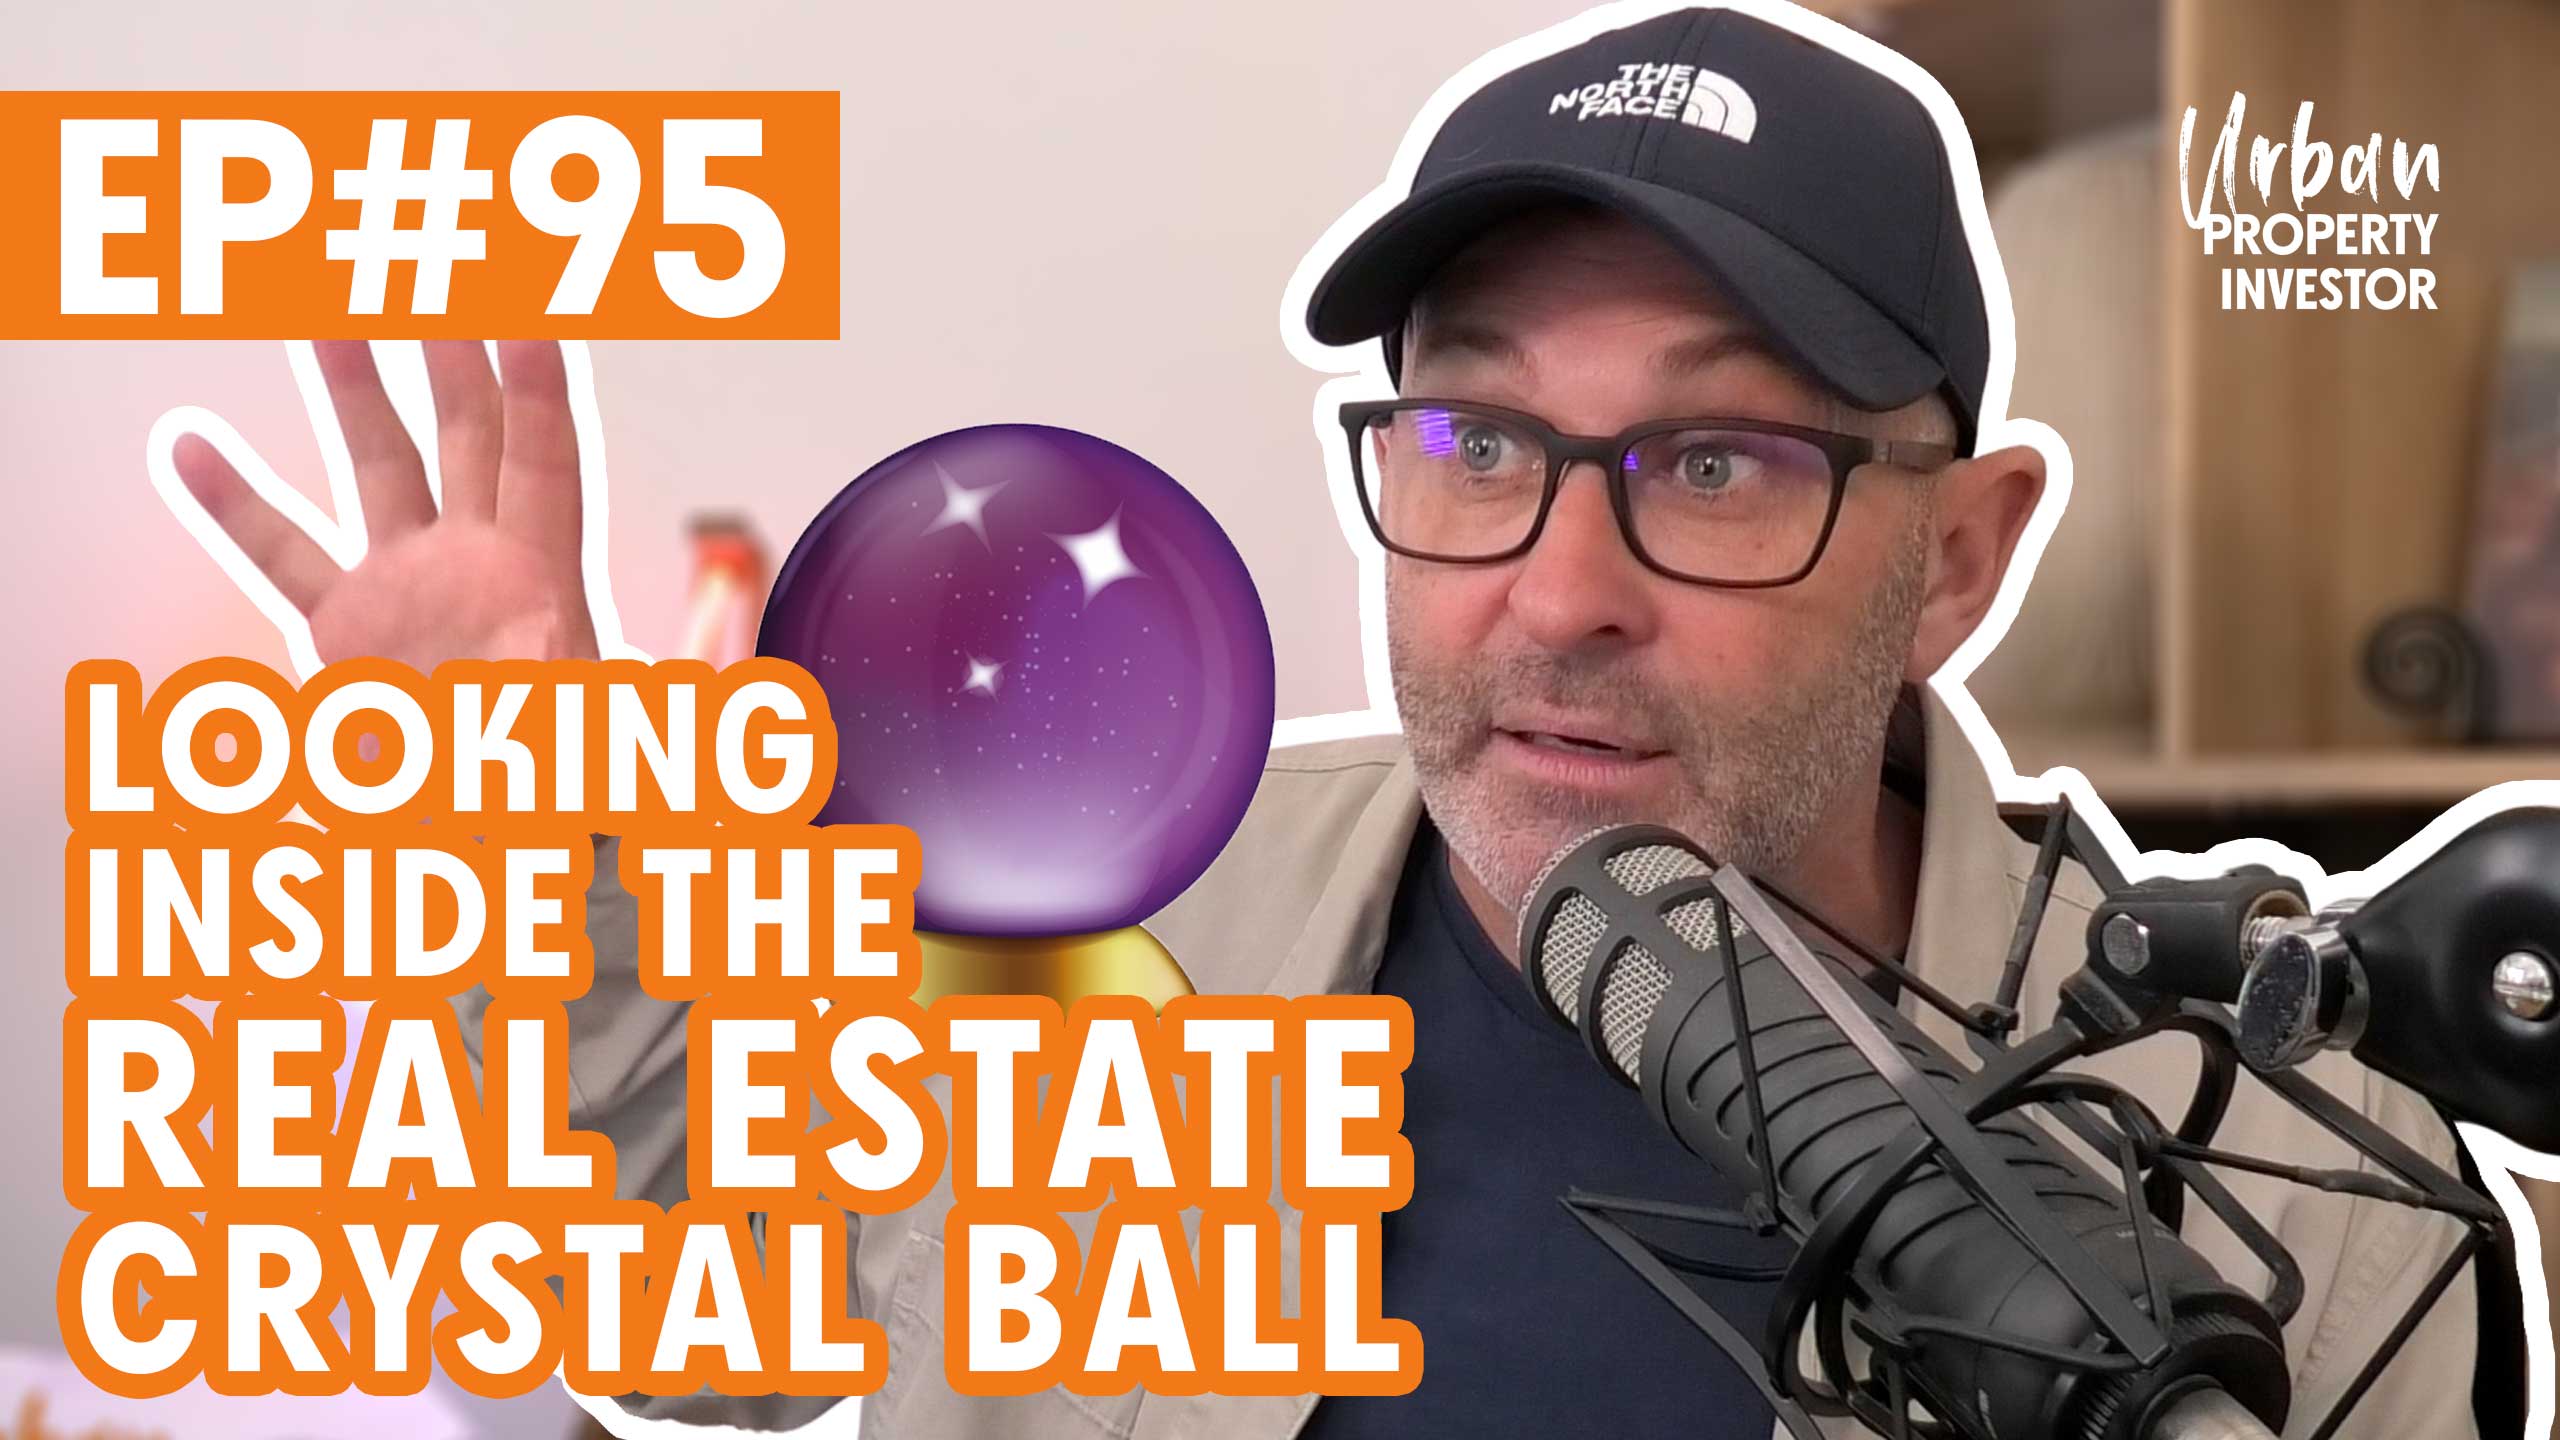 Looking Inside The Real Estate Crystal Ball